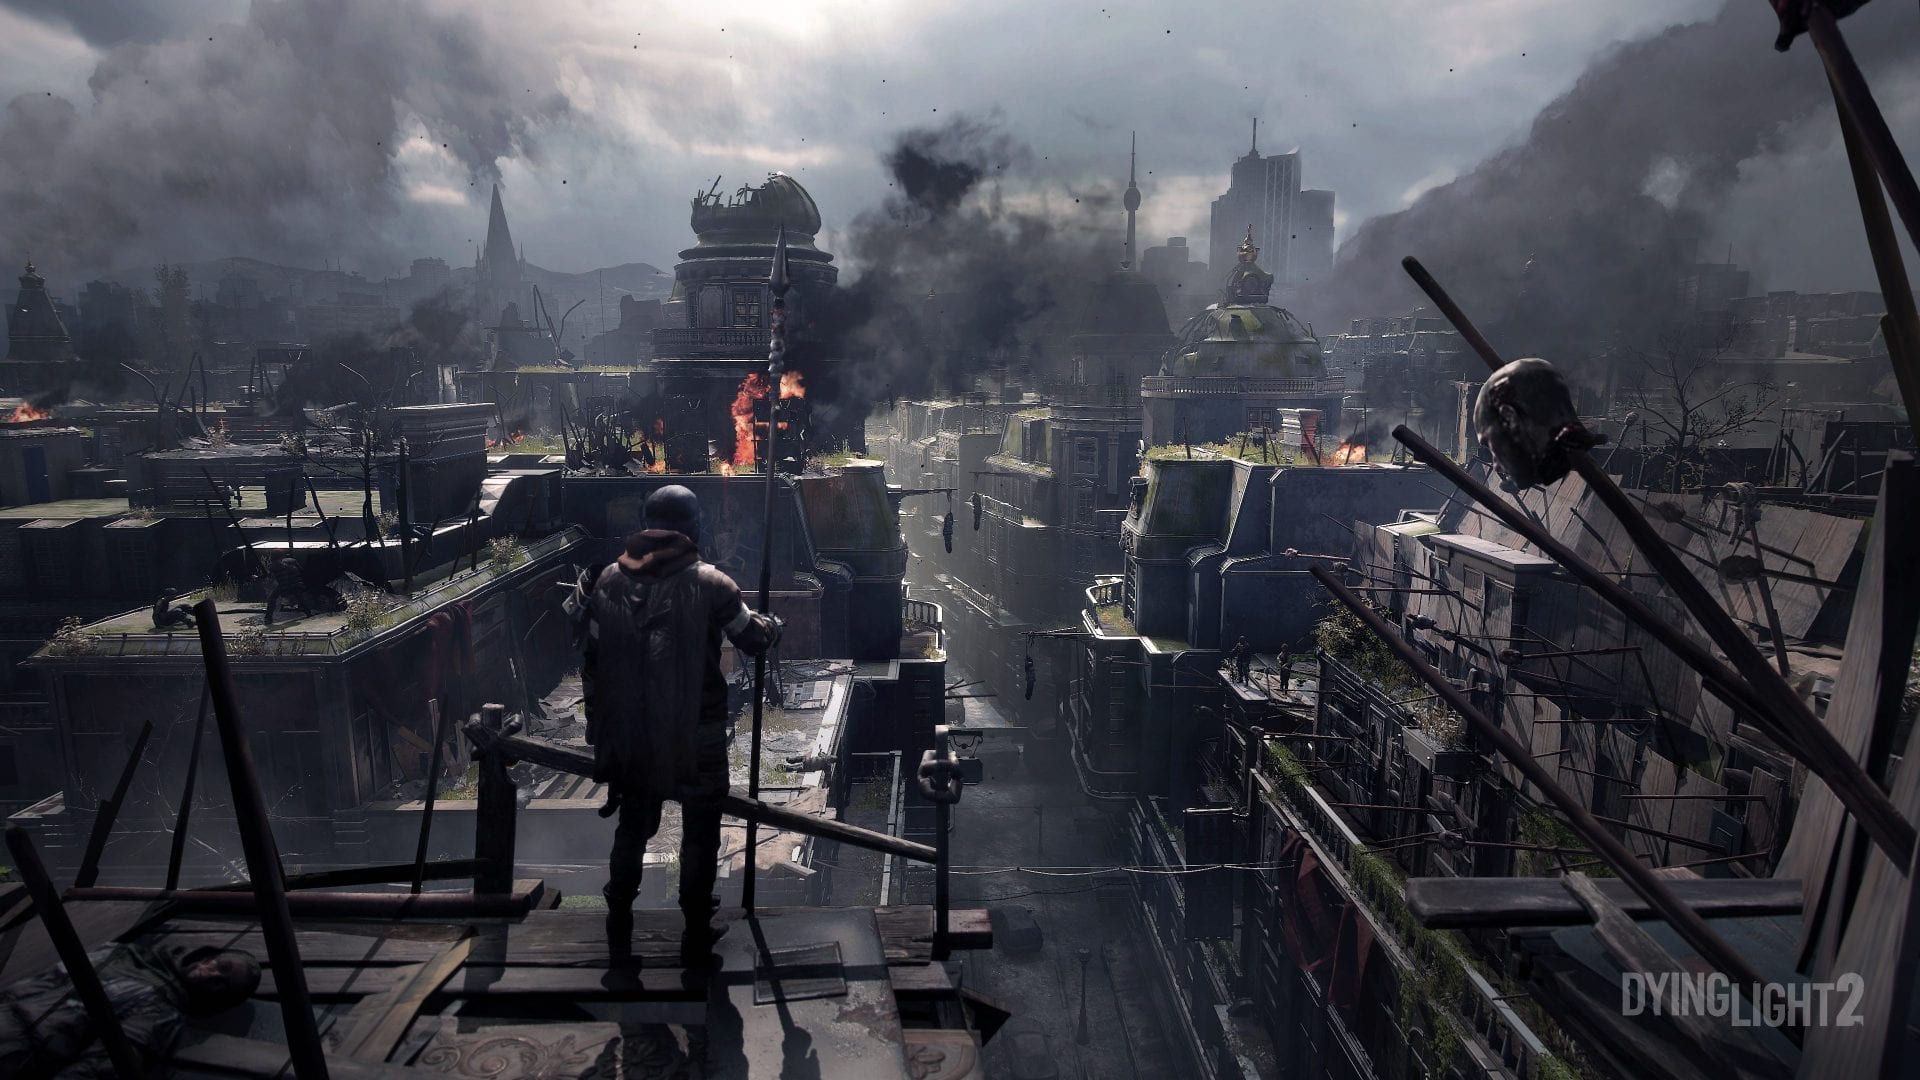 download dying light game for free